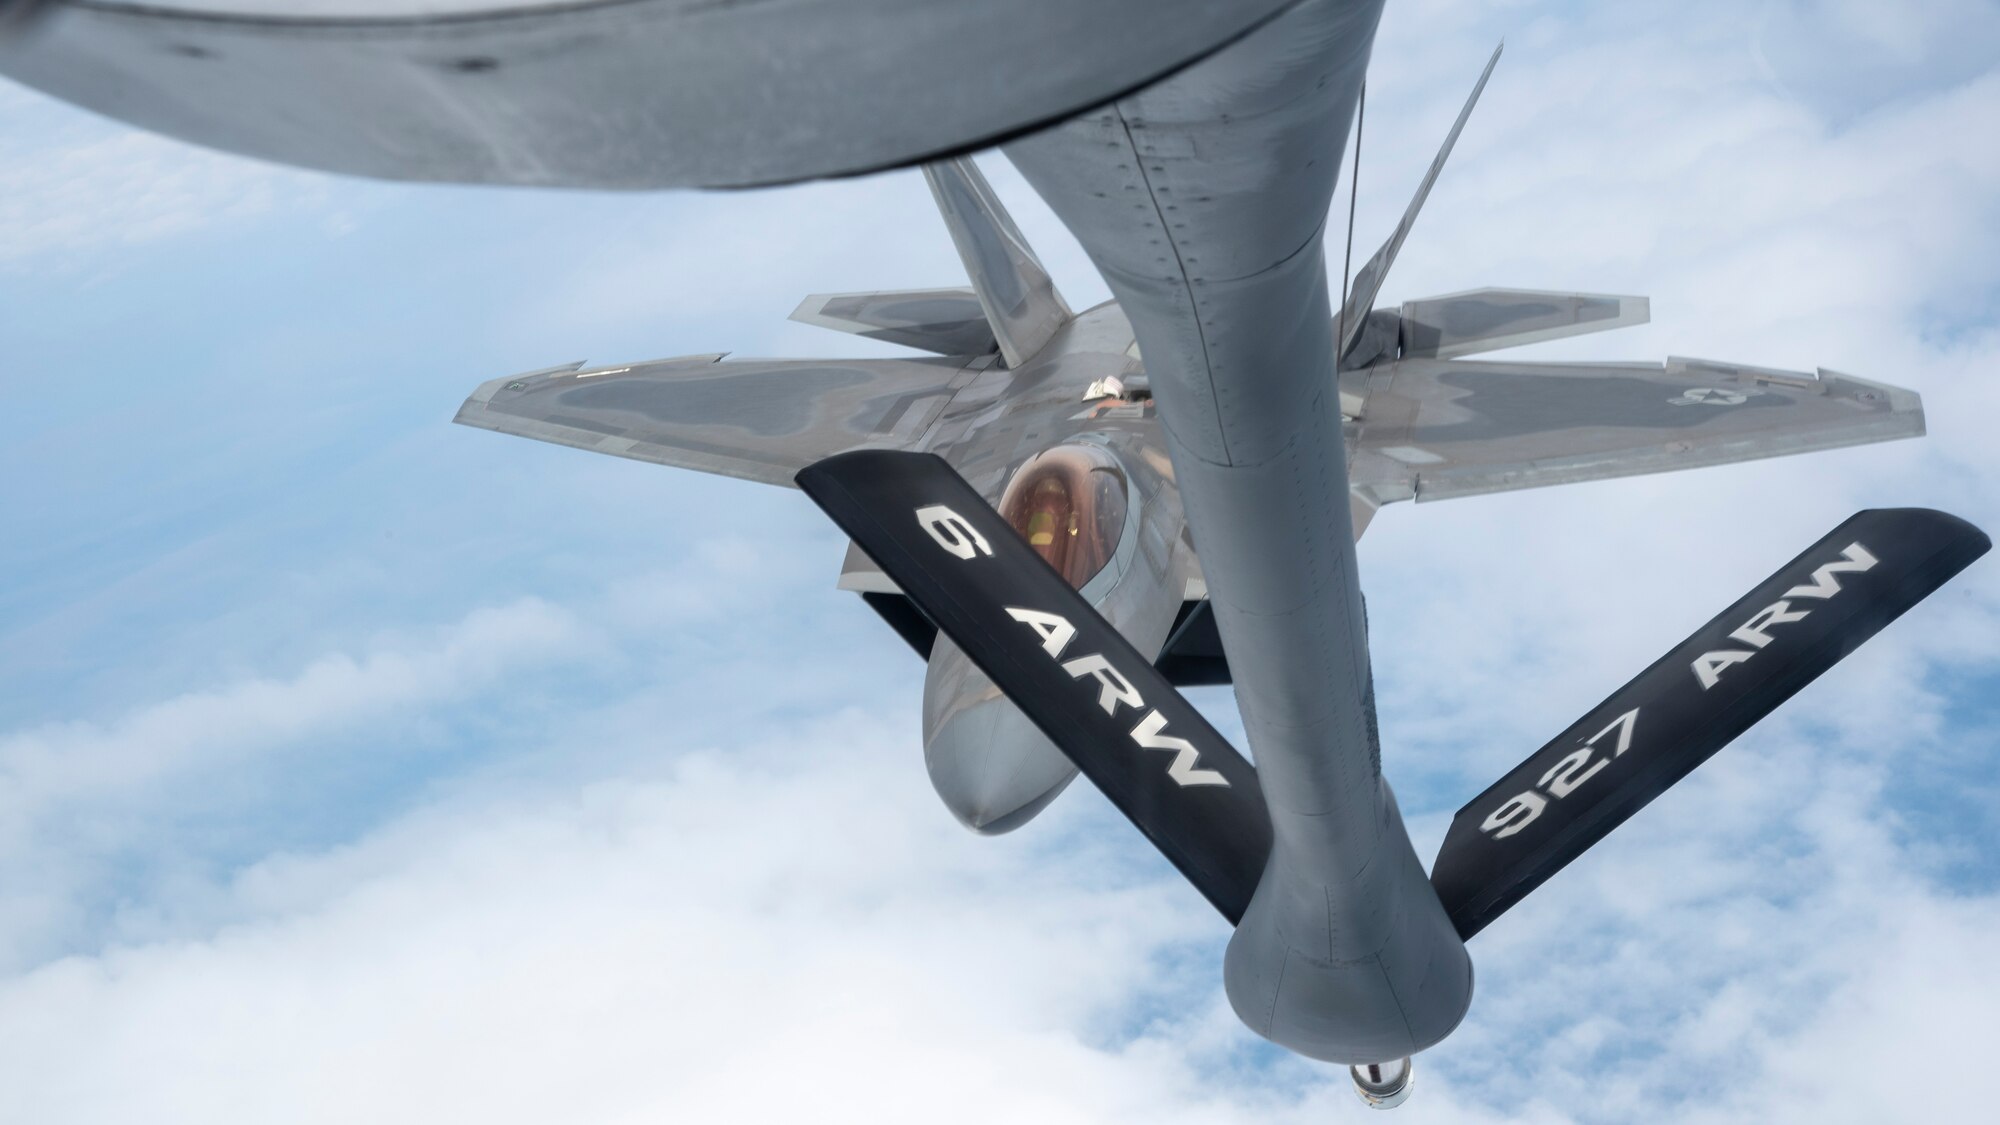 U.S. Air Force Maj. Joshua “Cabo” Gunderson, F-22 Raptor Demonstration Team commander, prepares to receive fuel from a MacDill Air Force Base, Fla., KC-135 Stratotanker, April 17, 2021.